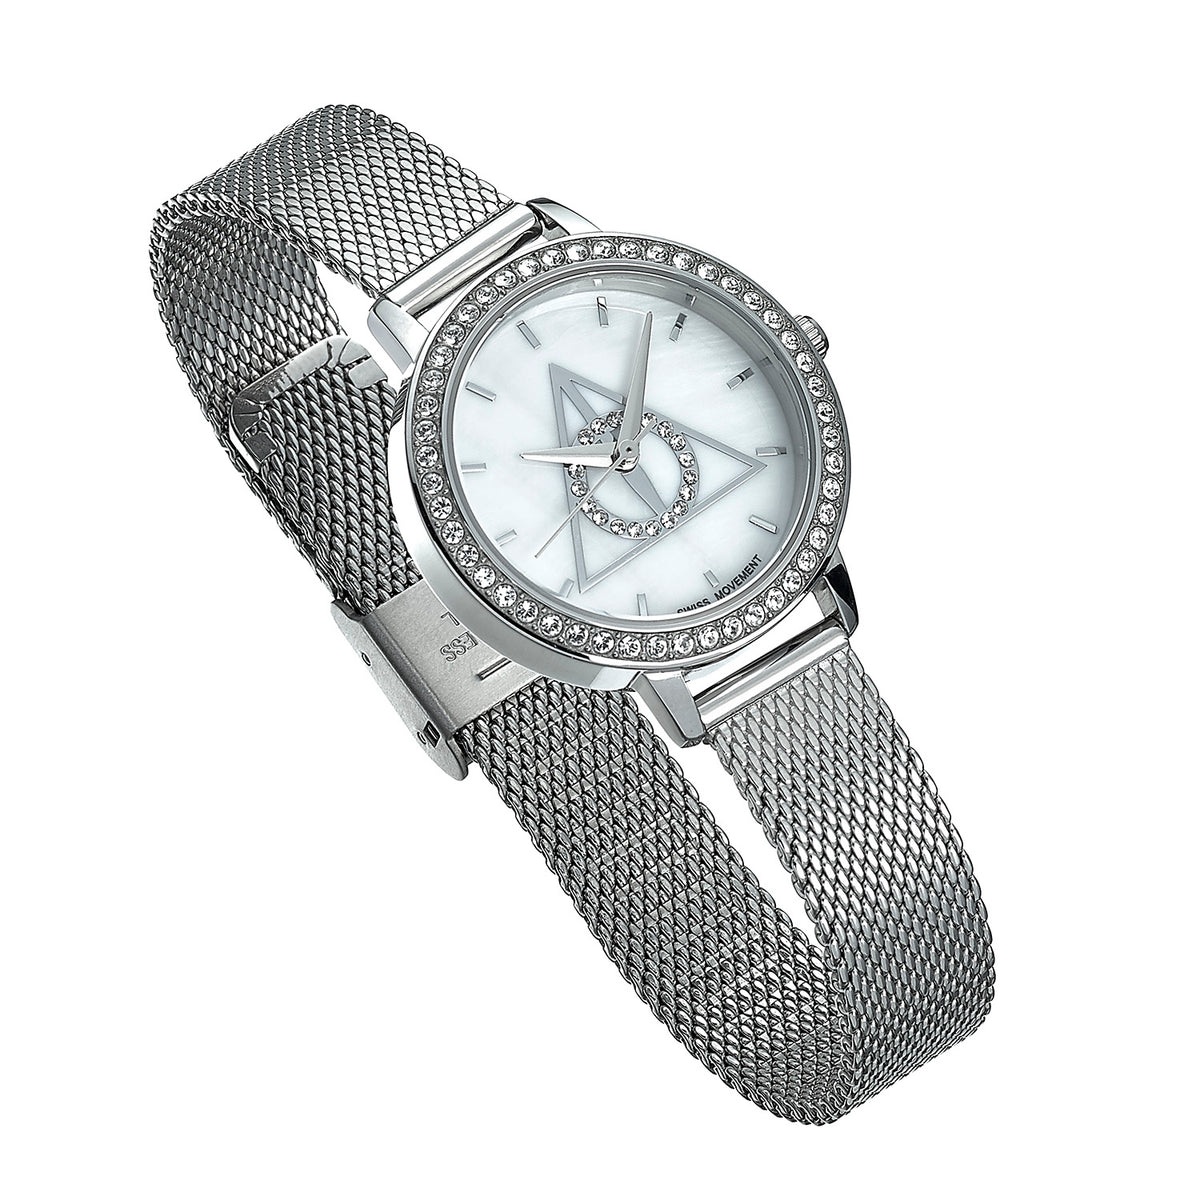 Harry Potter Deathly Hallows Silver Watch Embellished with Swarovski Crystals  - Official Licensed Product - Free Tracked UK Shipping!